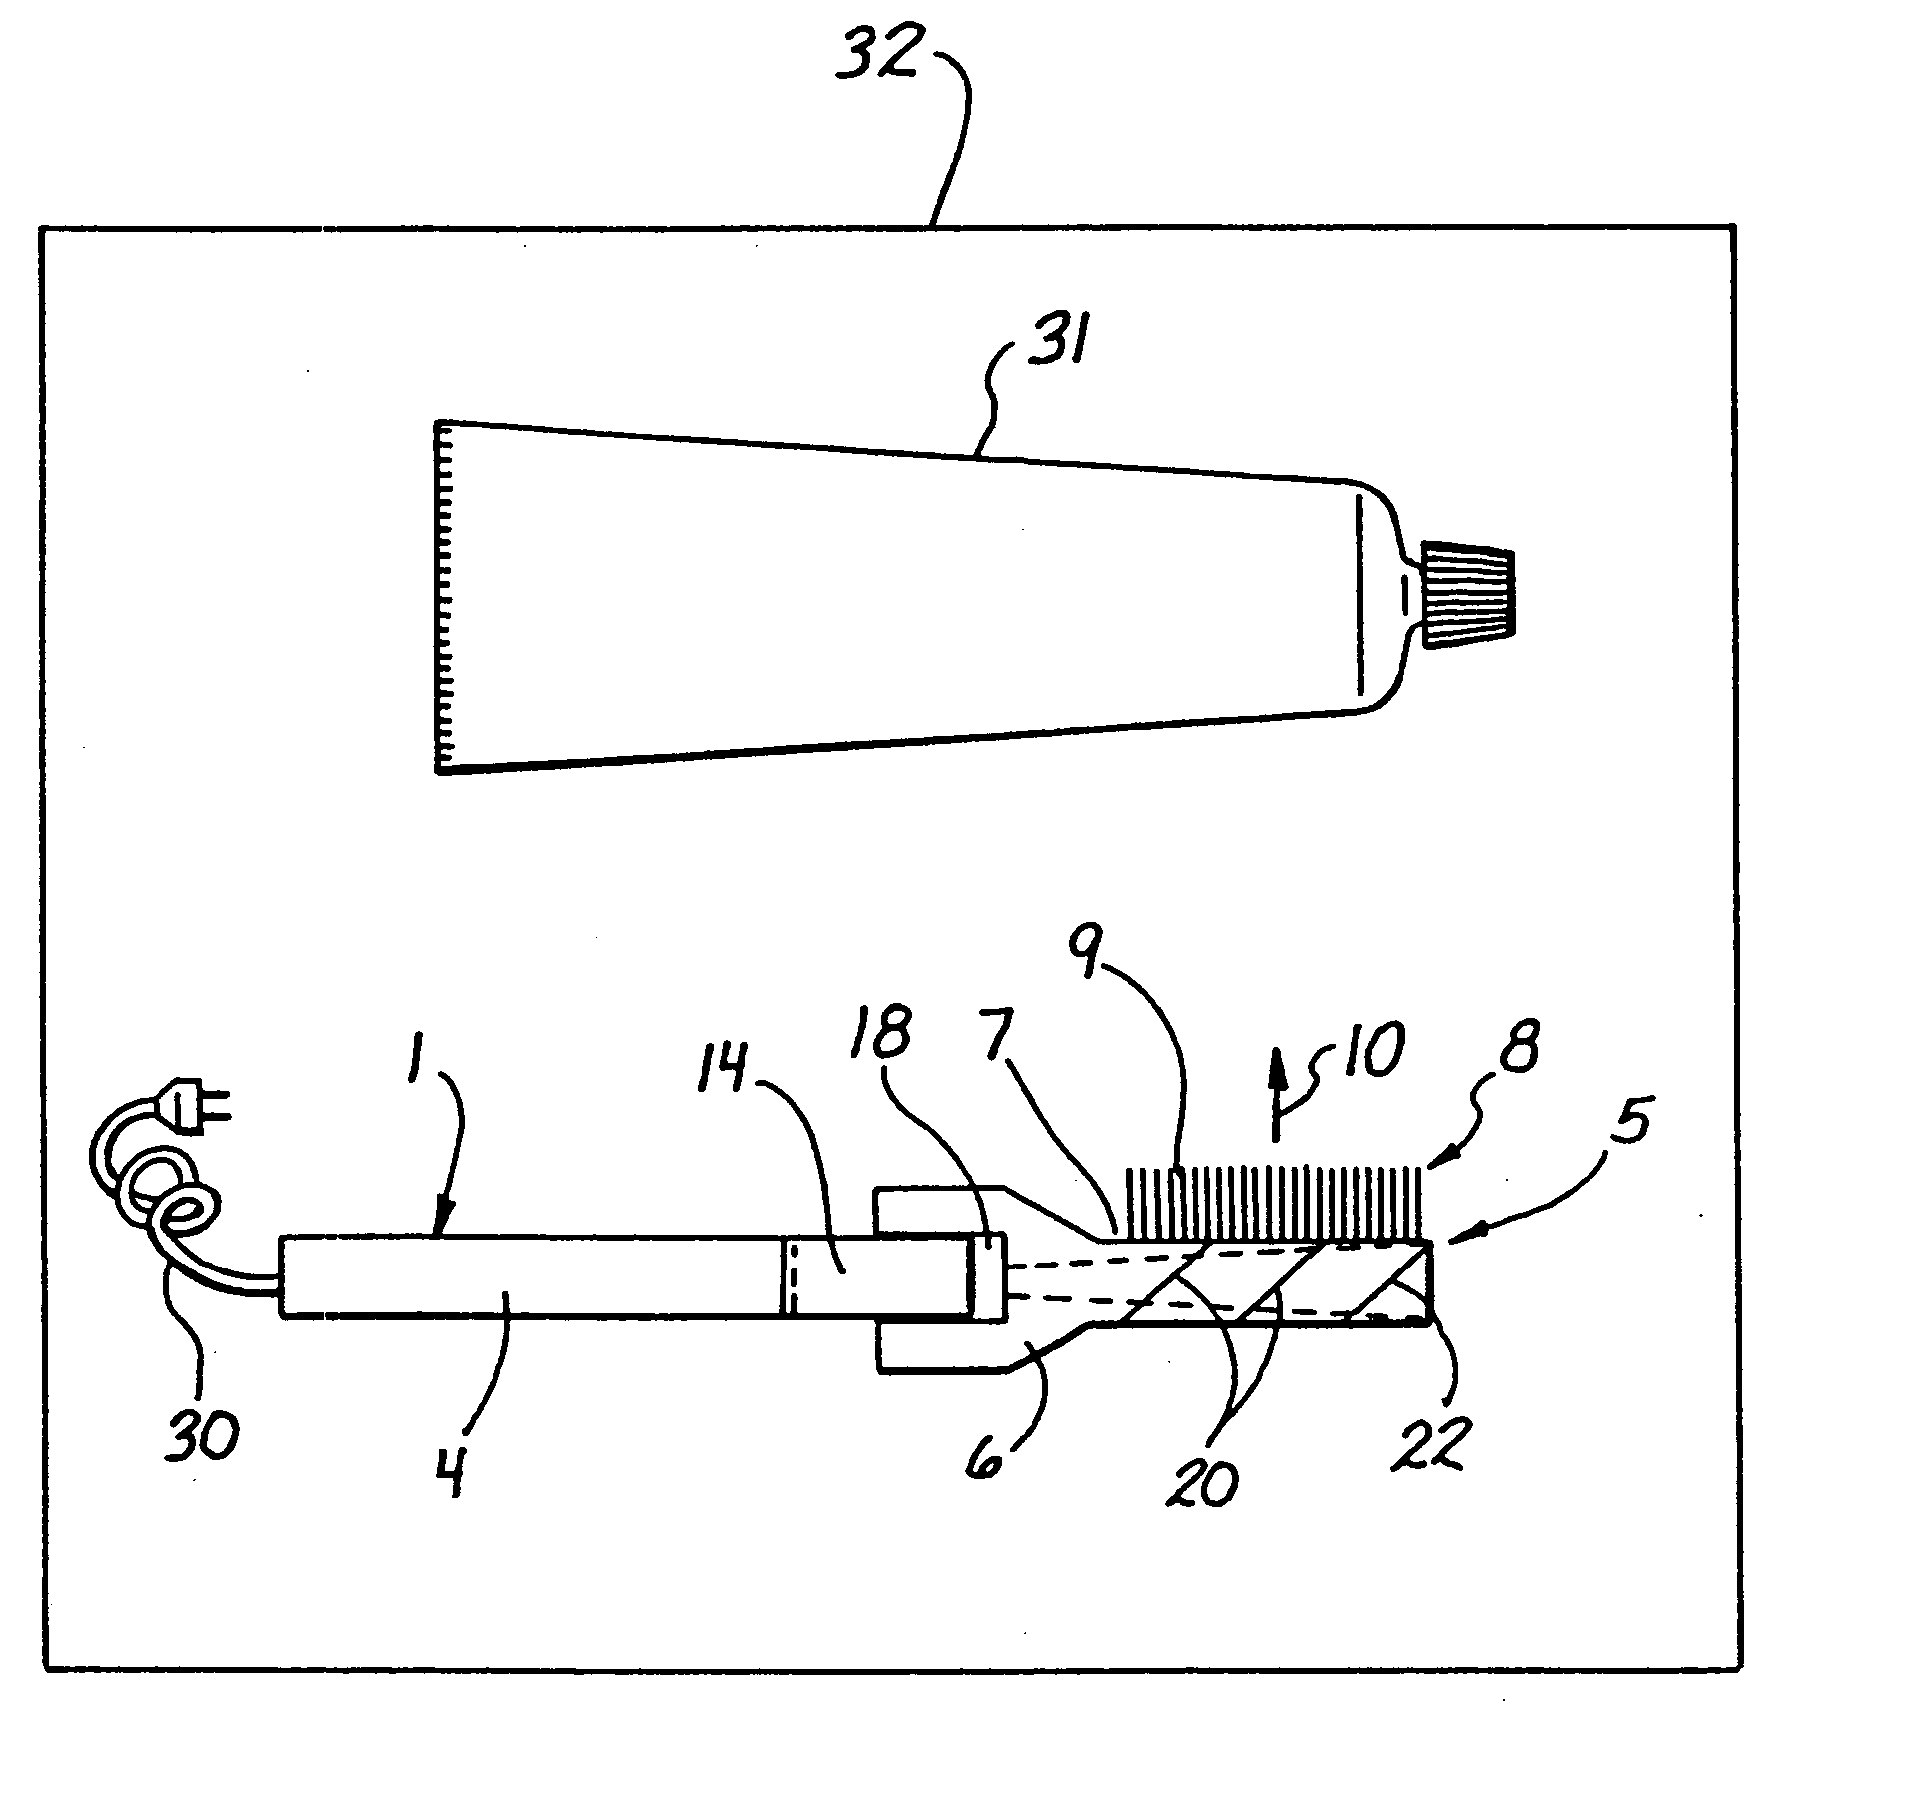 Electromagnetic radiation emitting toothbrush and dentifrice system